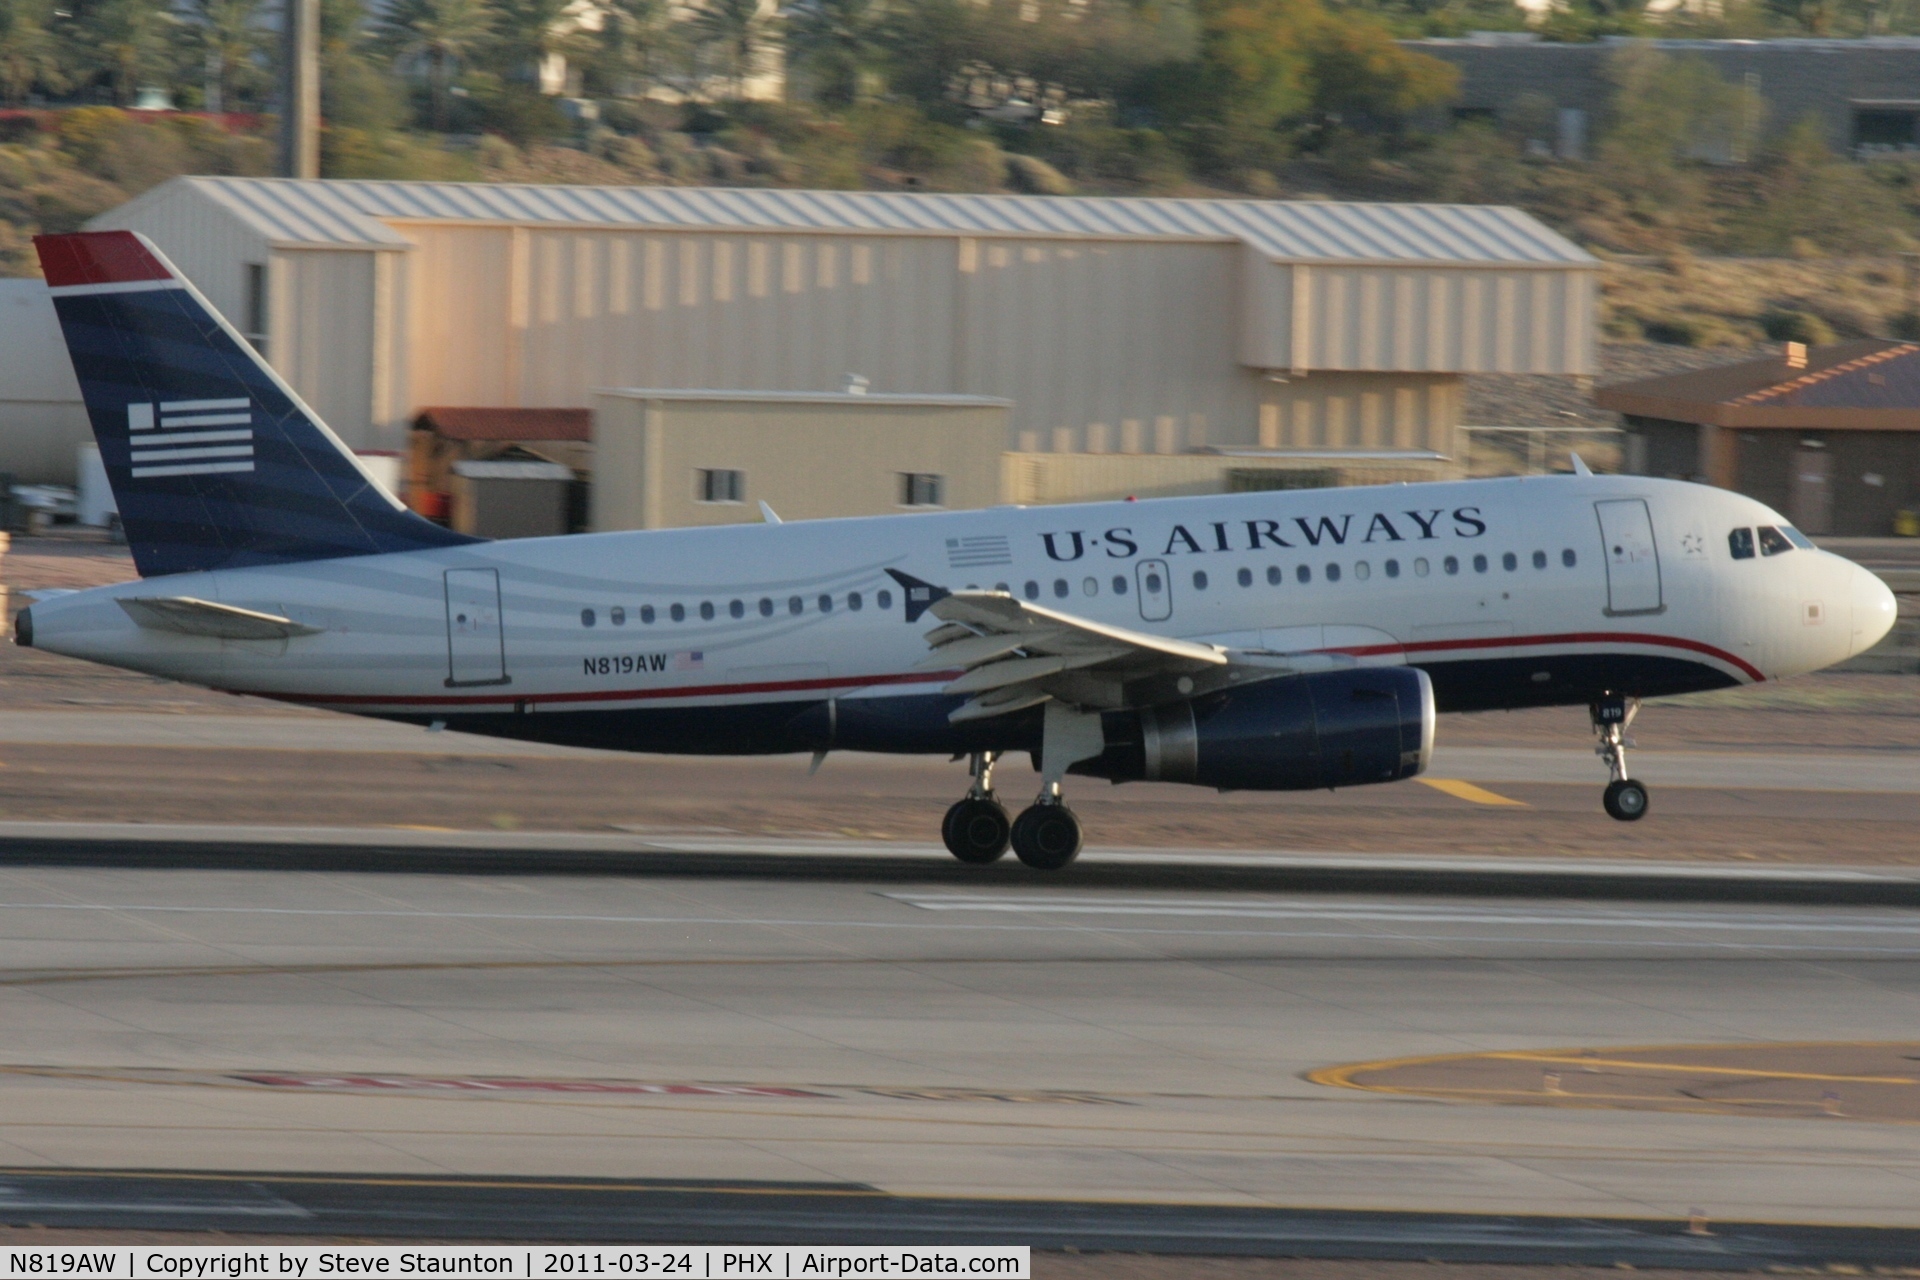 N819AW, 2000 Airbus A319-132 C/N 1395, Taken at Phoenix Sky Harbor Airport, in March 2011 whilst on an Aeroprint Aviation tour